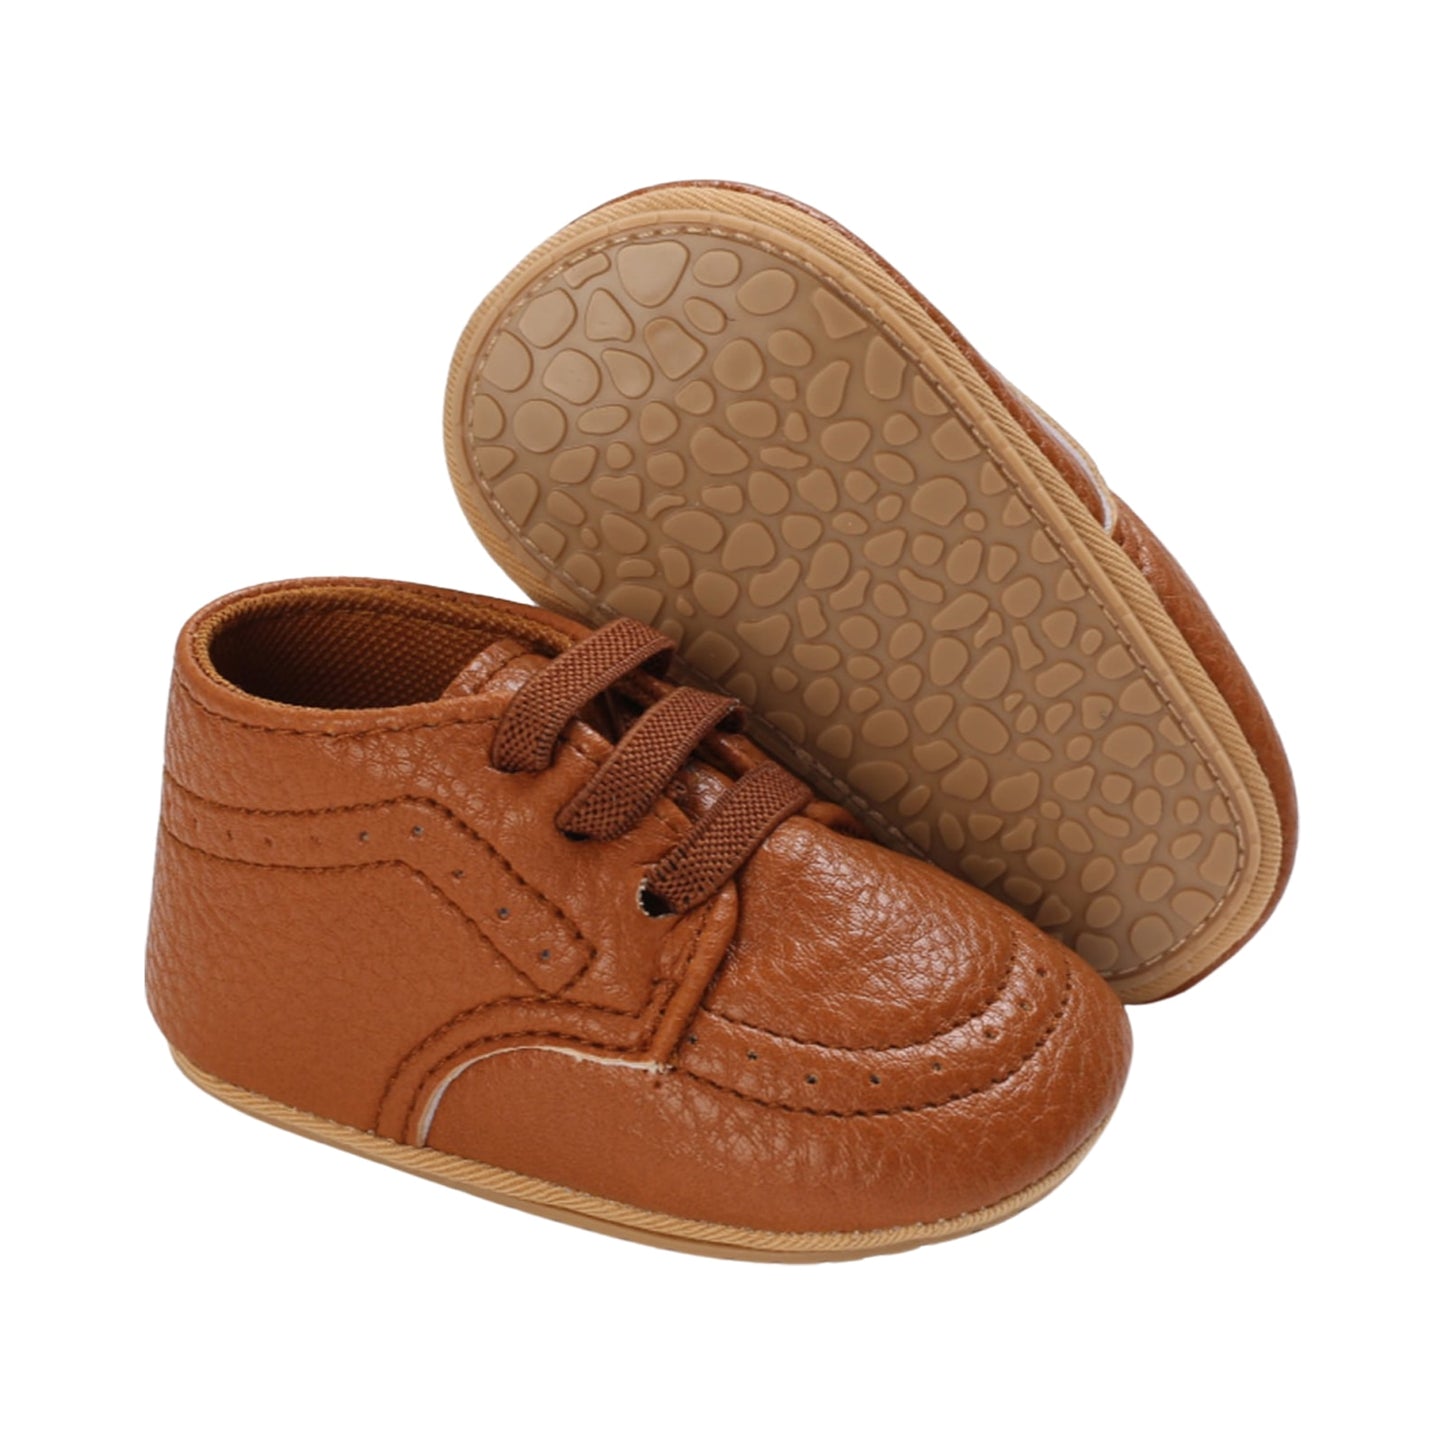 THE HUDSON COLLEGIATE SHOES